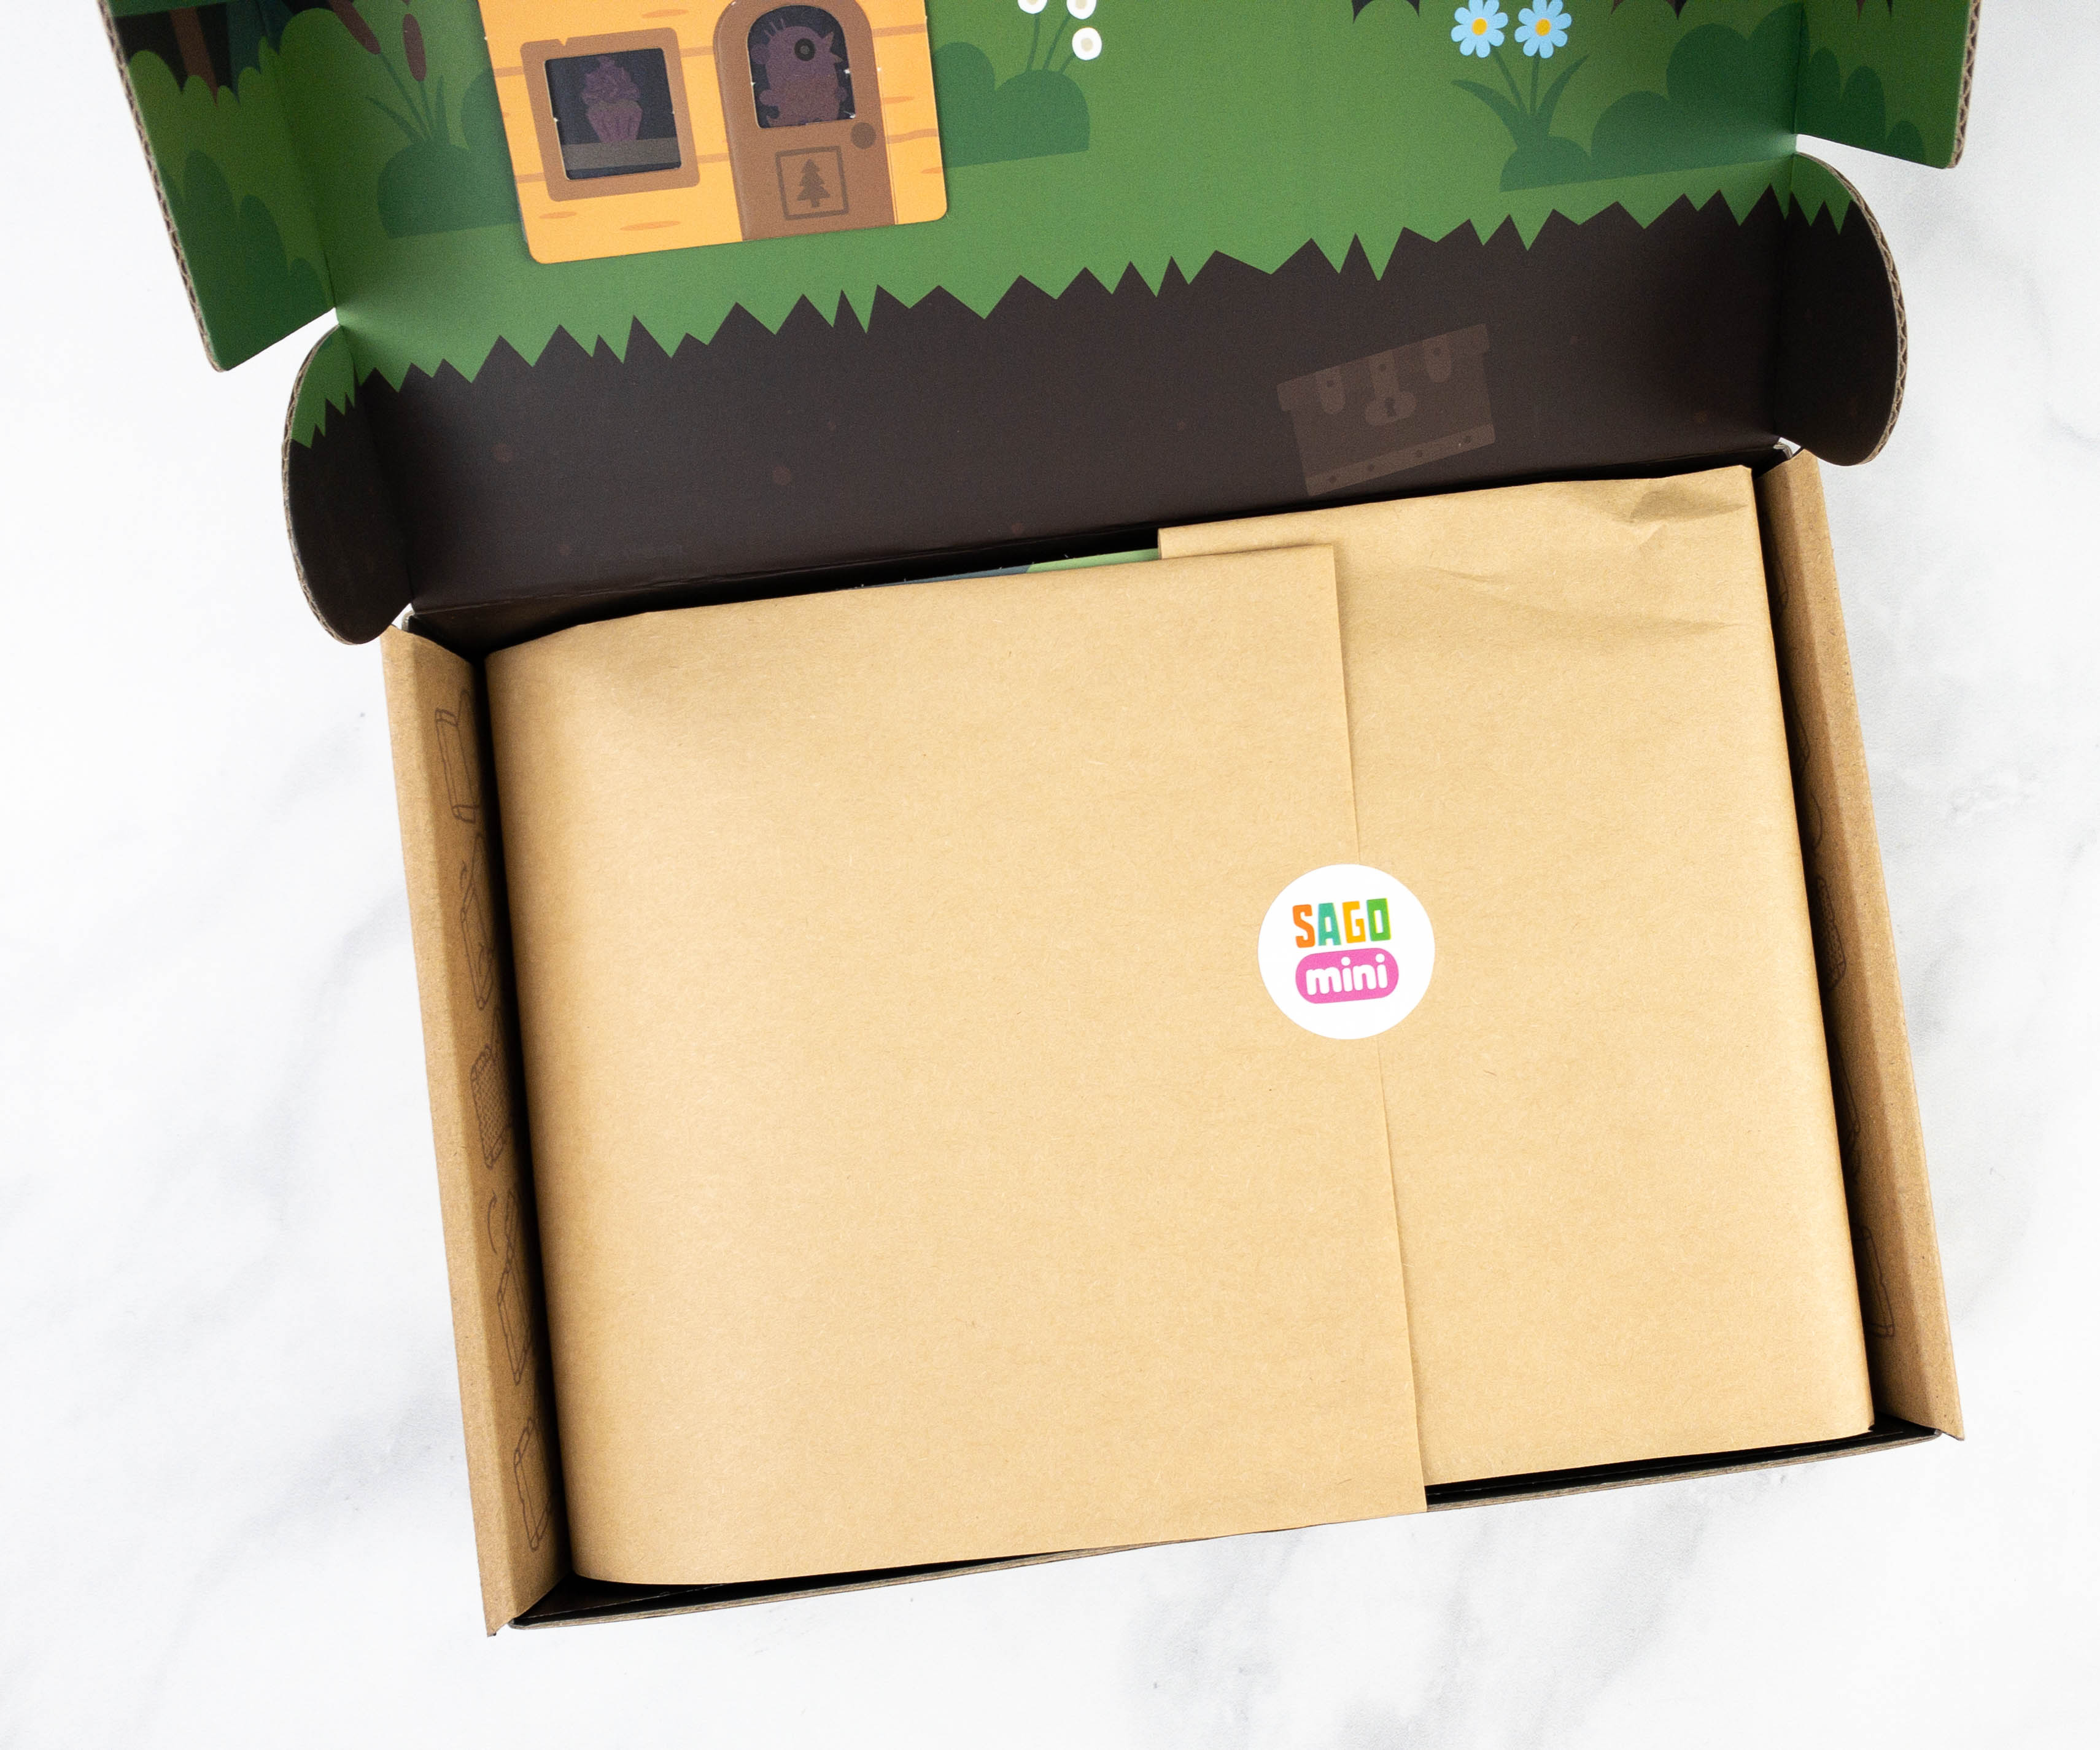 Sago Mini Box Review - - FOREST Coupon Subscription + Hello